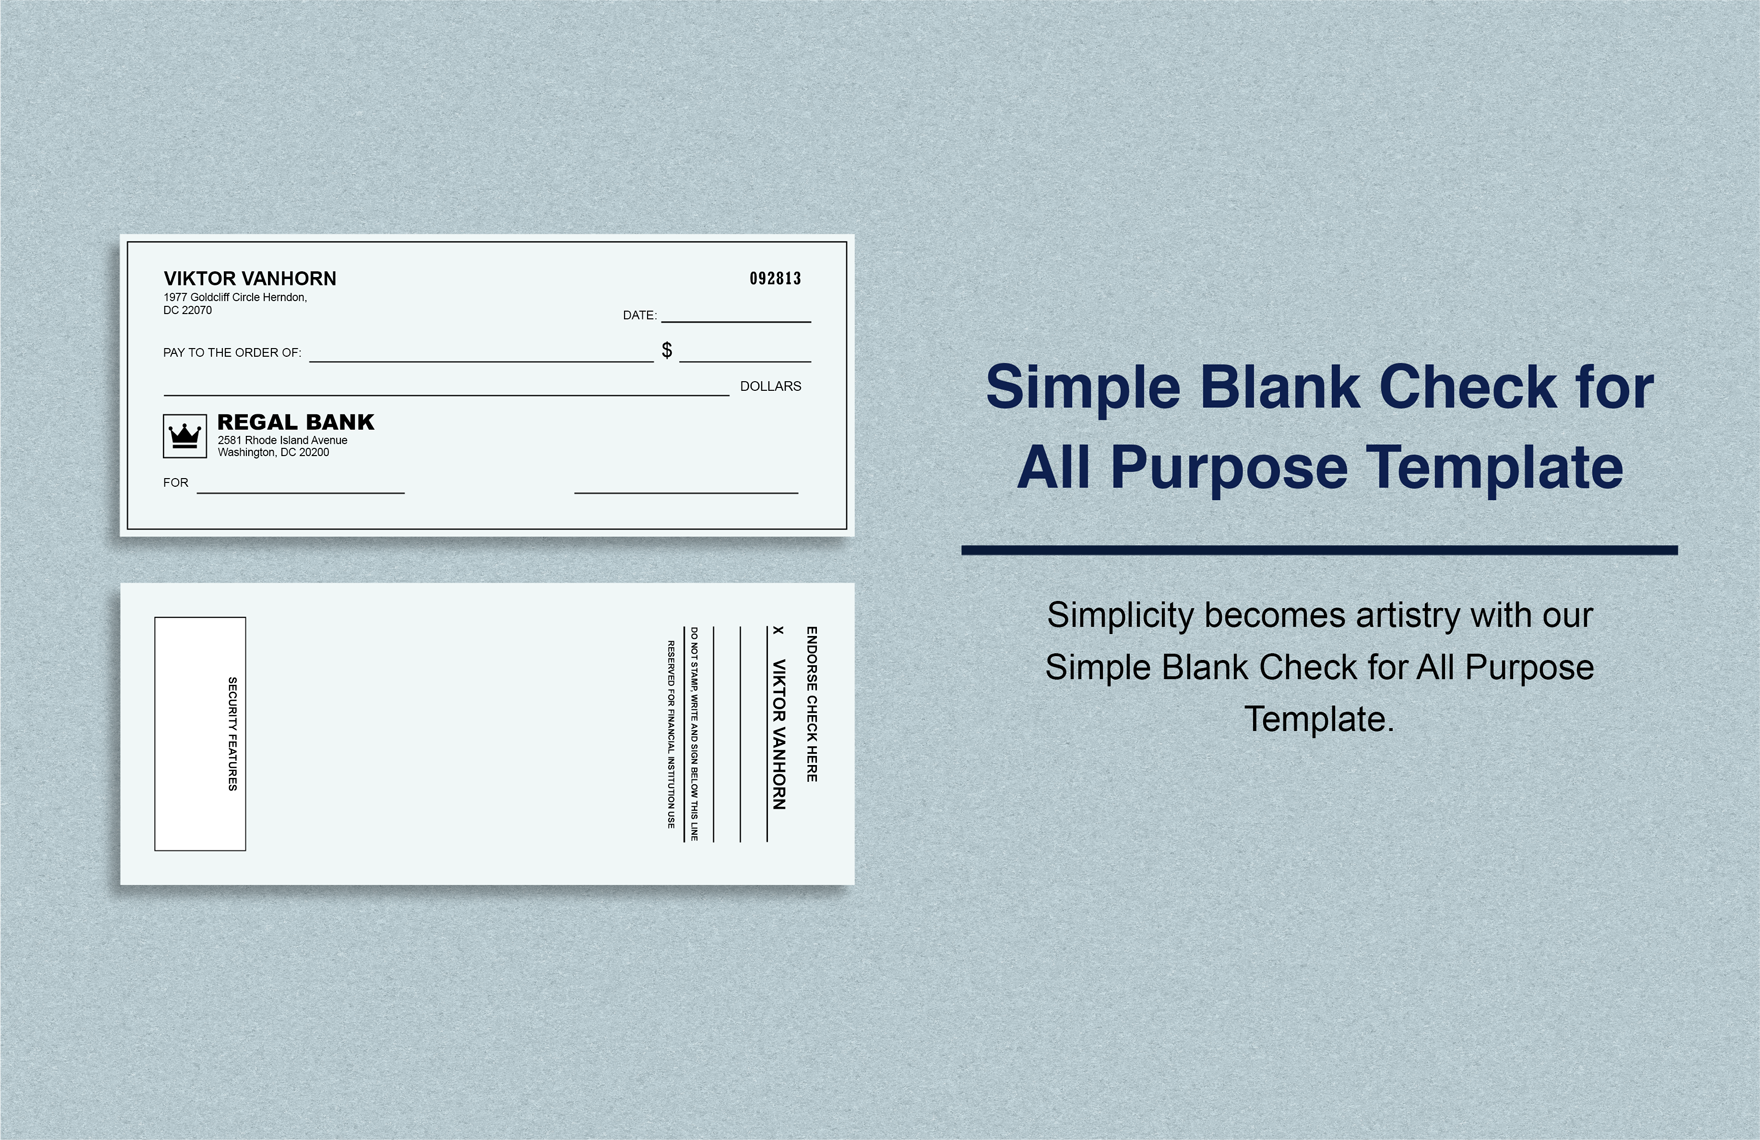 Simple Blank Check for All Purpose Template in Word, Illustrator, PSD